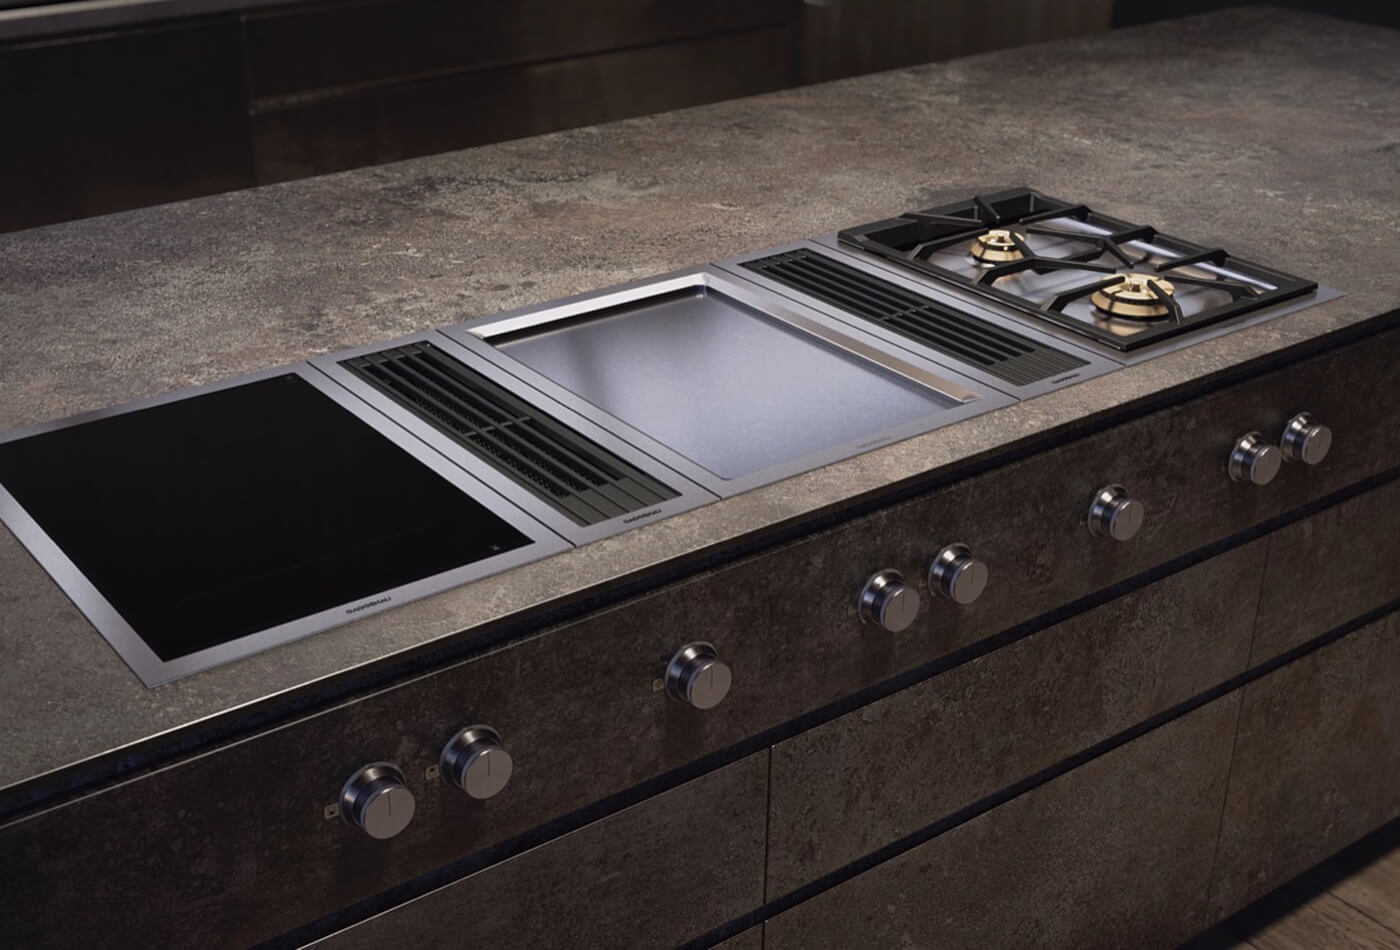 Heard About The Advanced Worktop Extractors